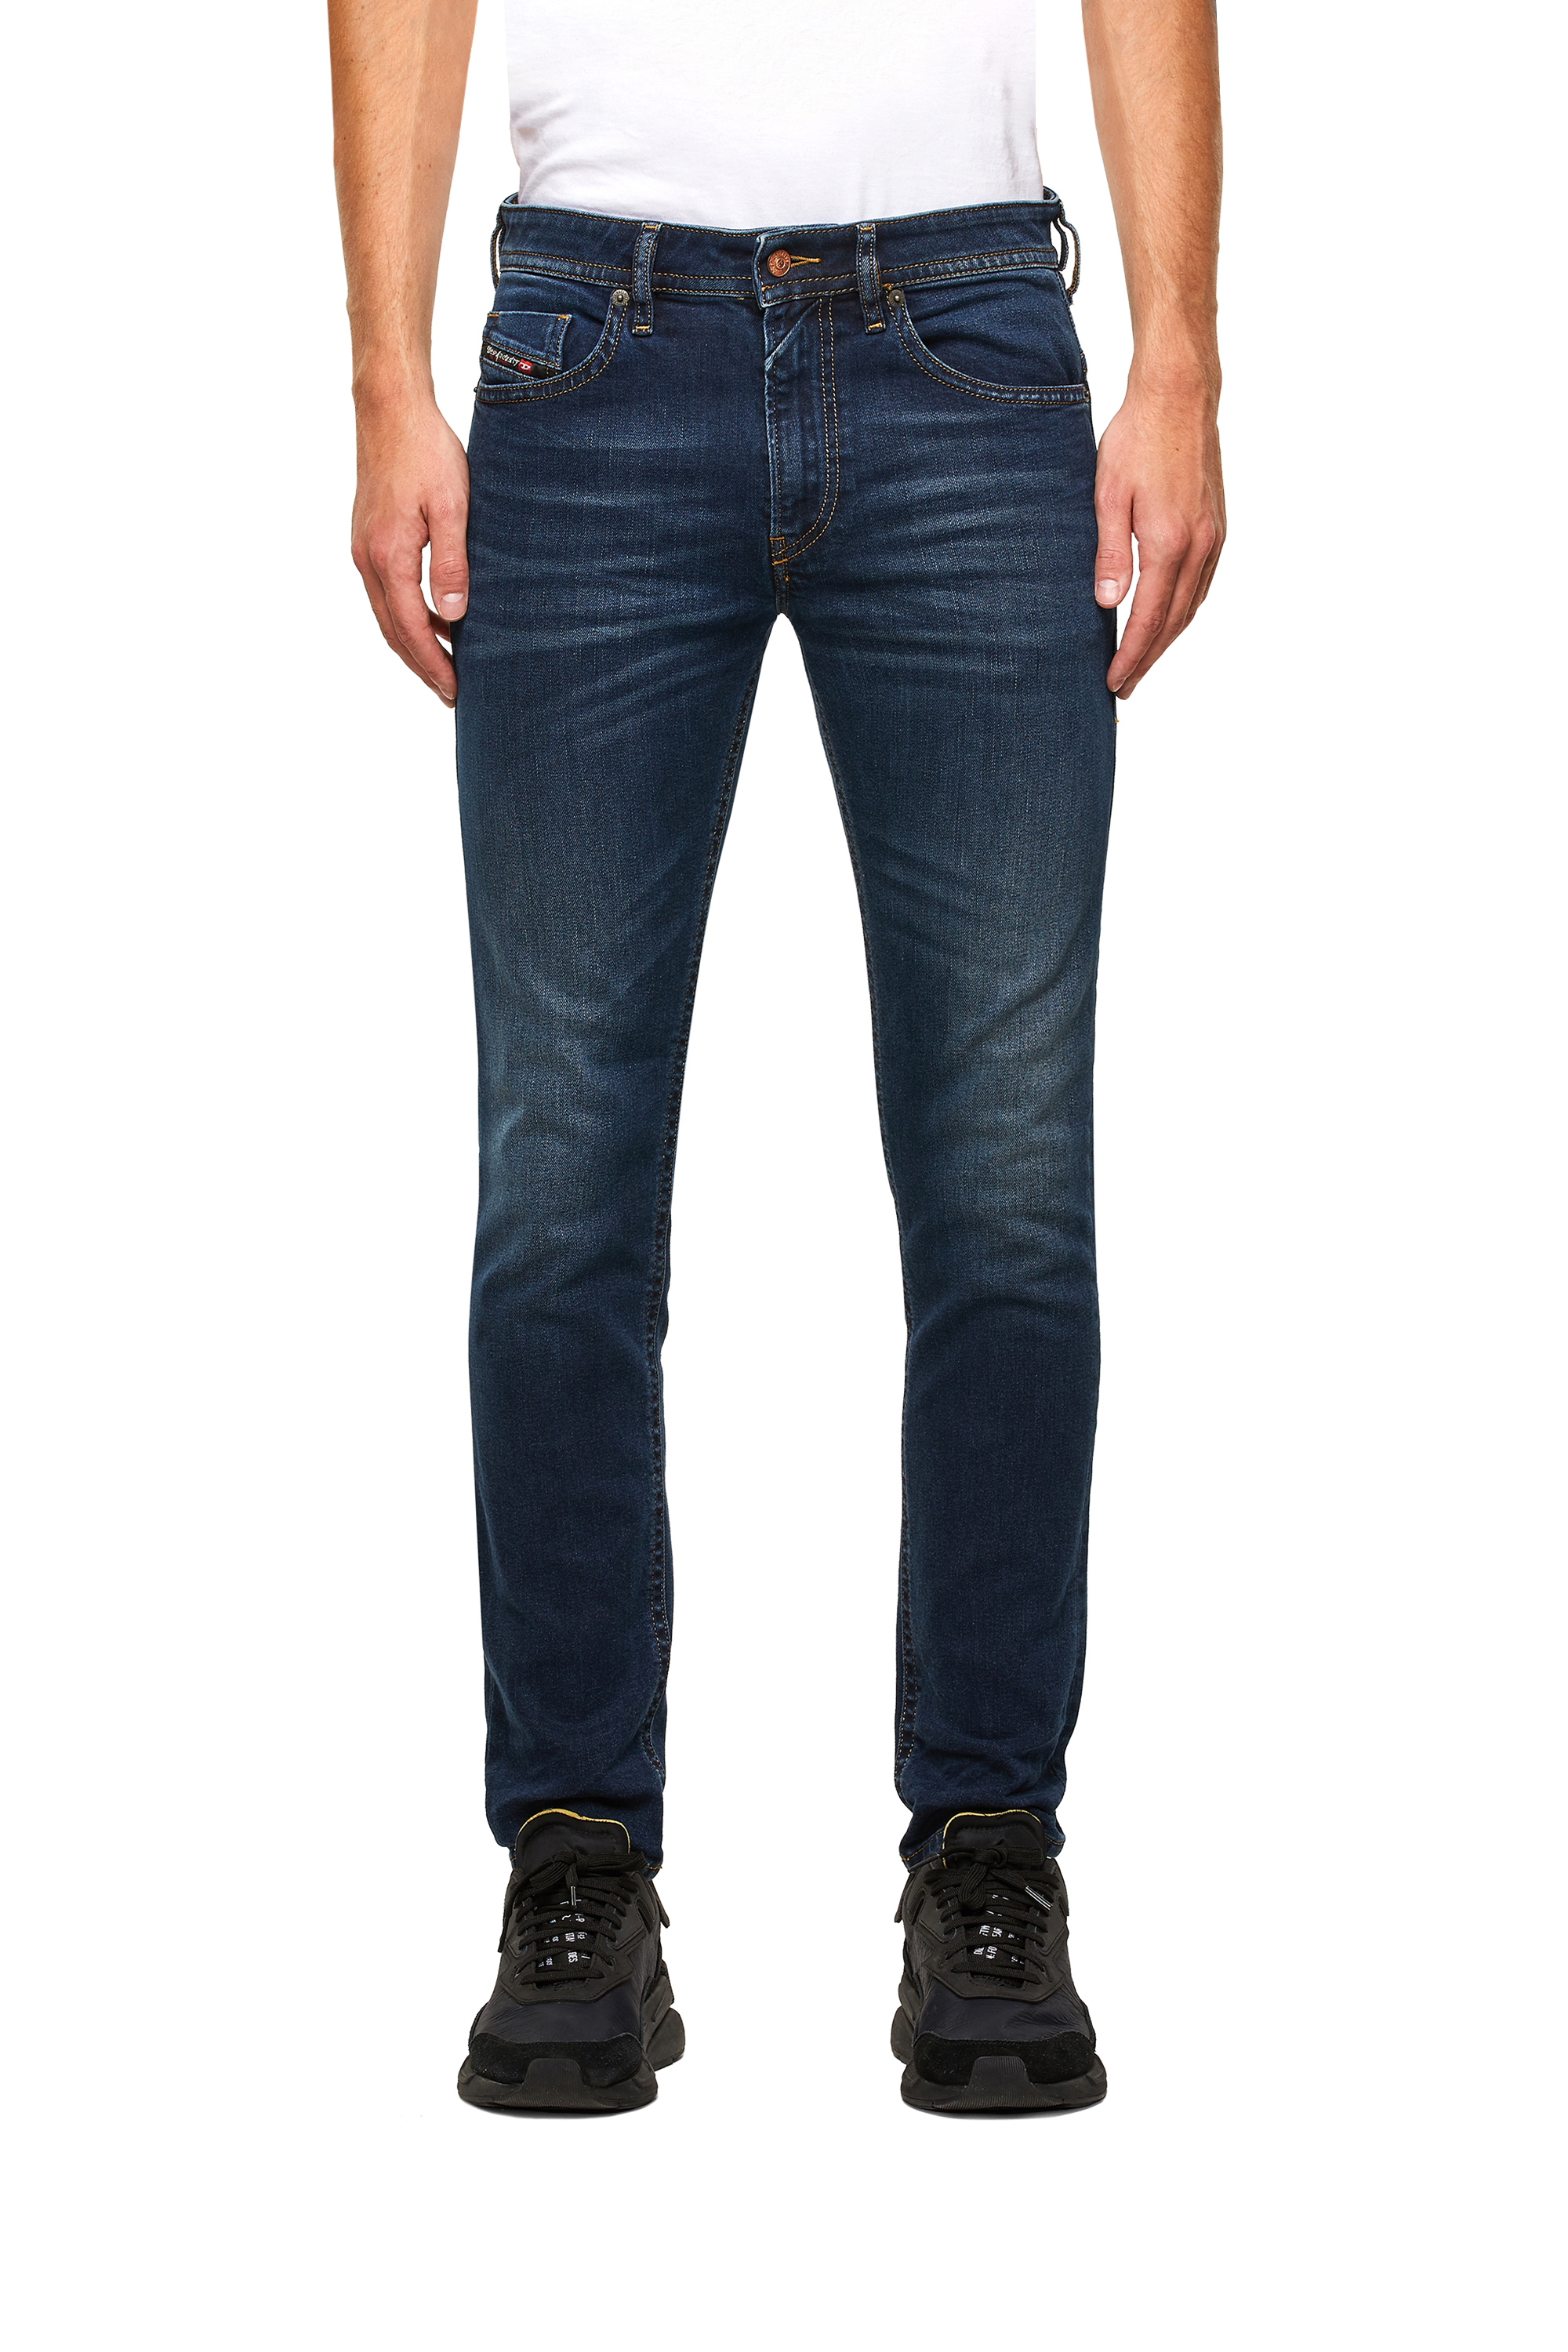 Men\'s Denim Guide: Fits, Styles, Stretch and Comfort Jeans for Men | Diesel